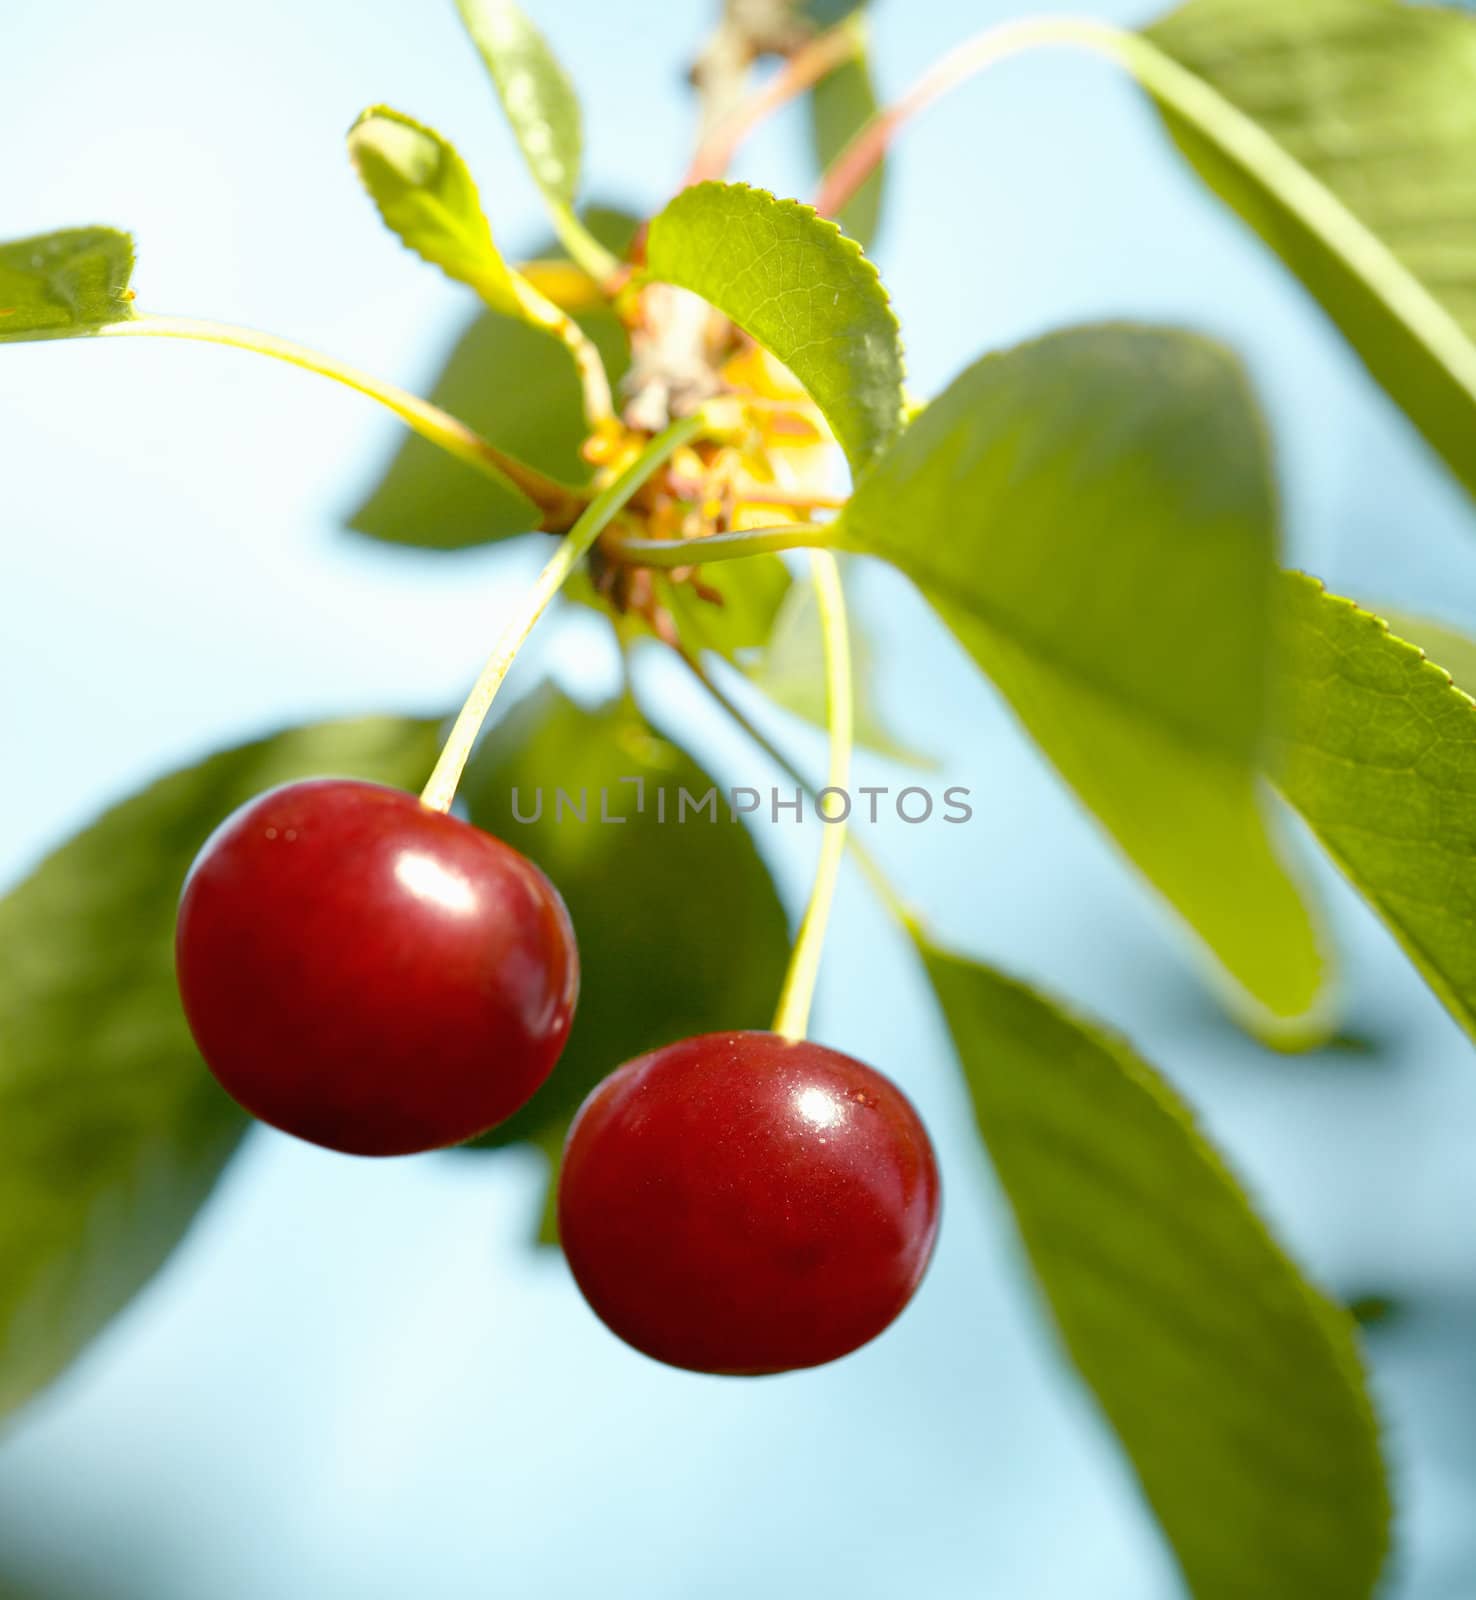 Closeup picture of two ripe cherries on the tree with green leaves.